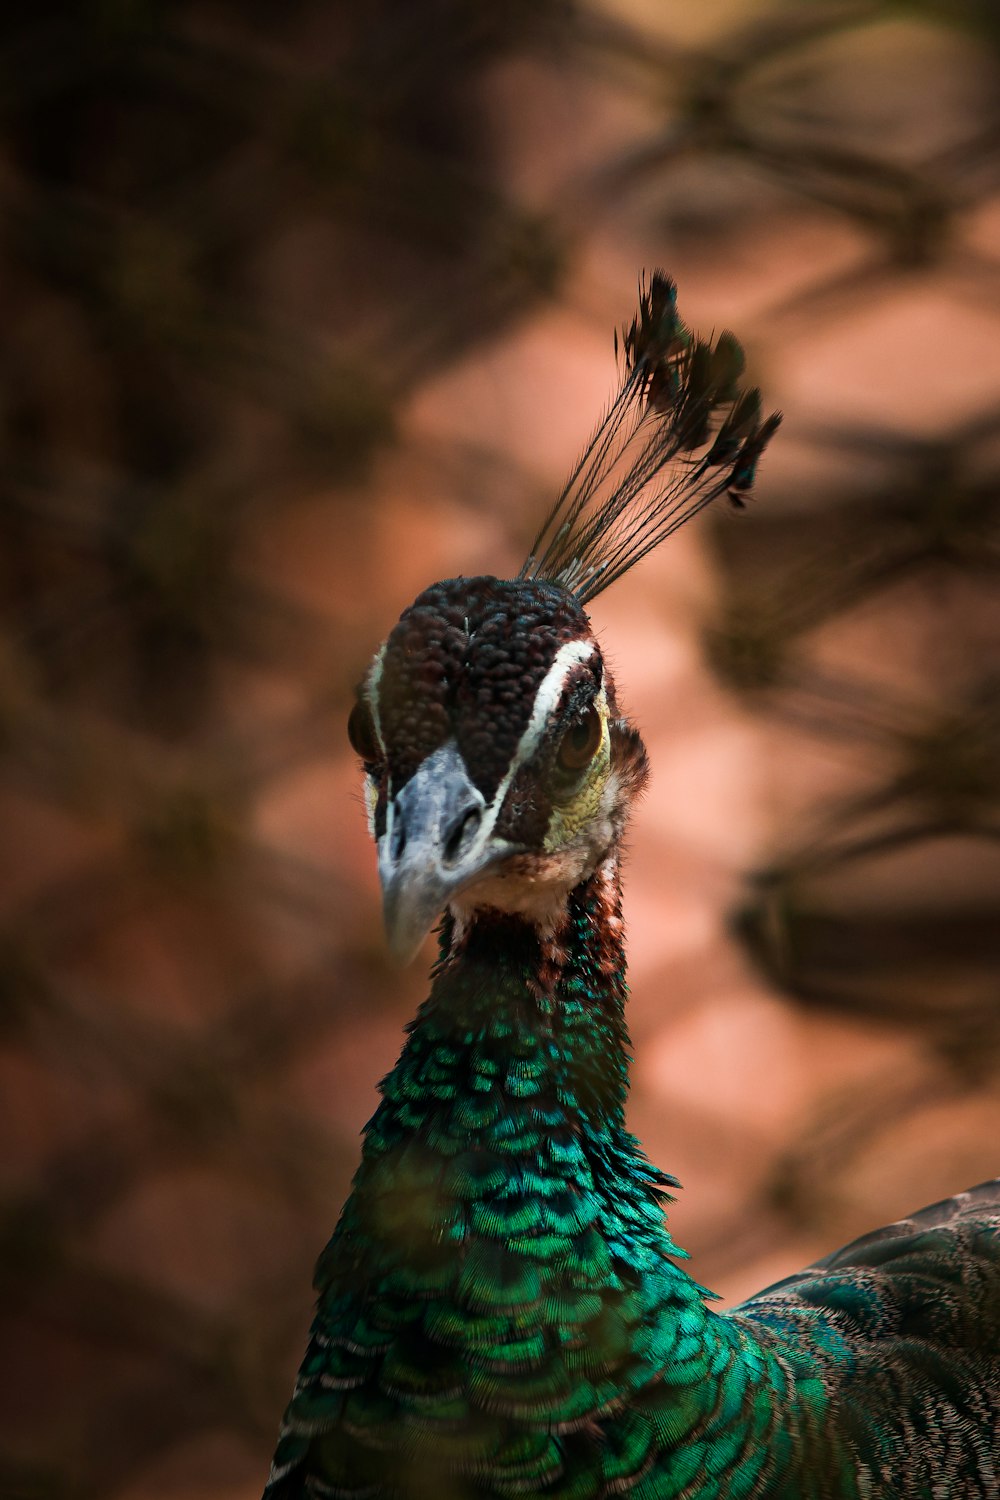 a close up of a peacock with a blurry background